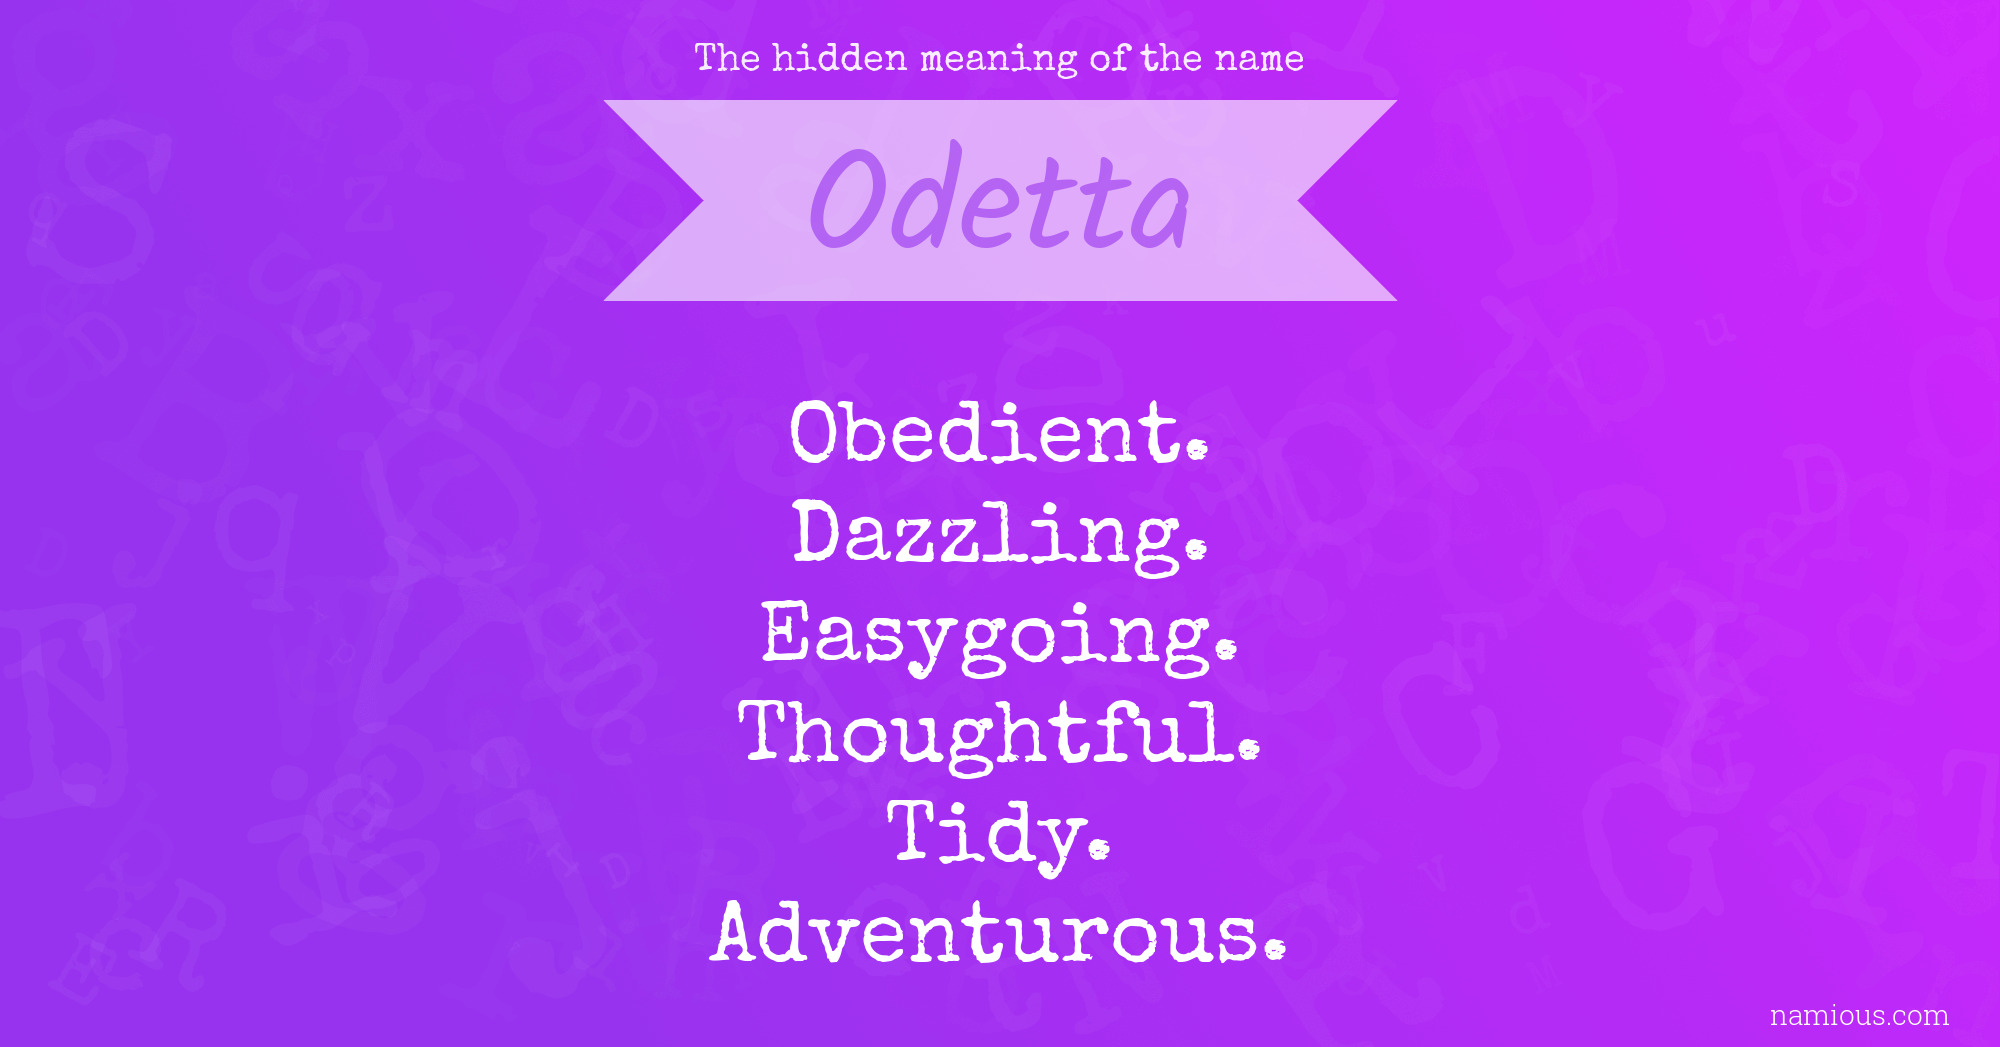 The hidden meaning of the name Odetta